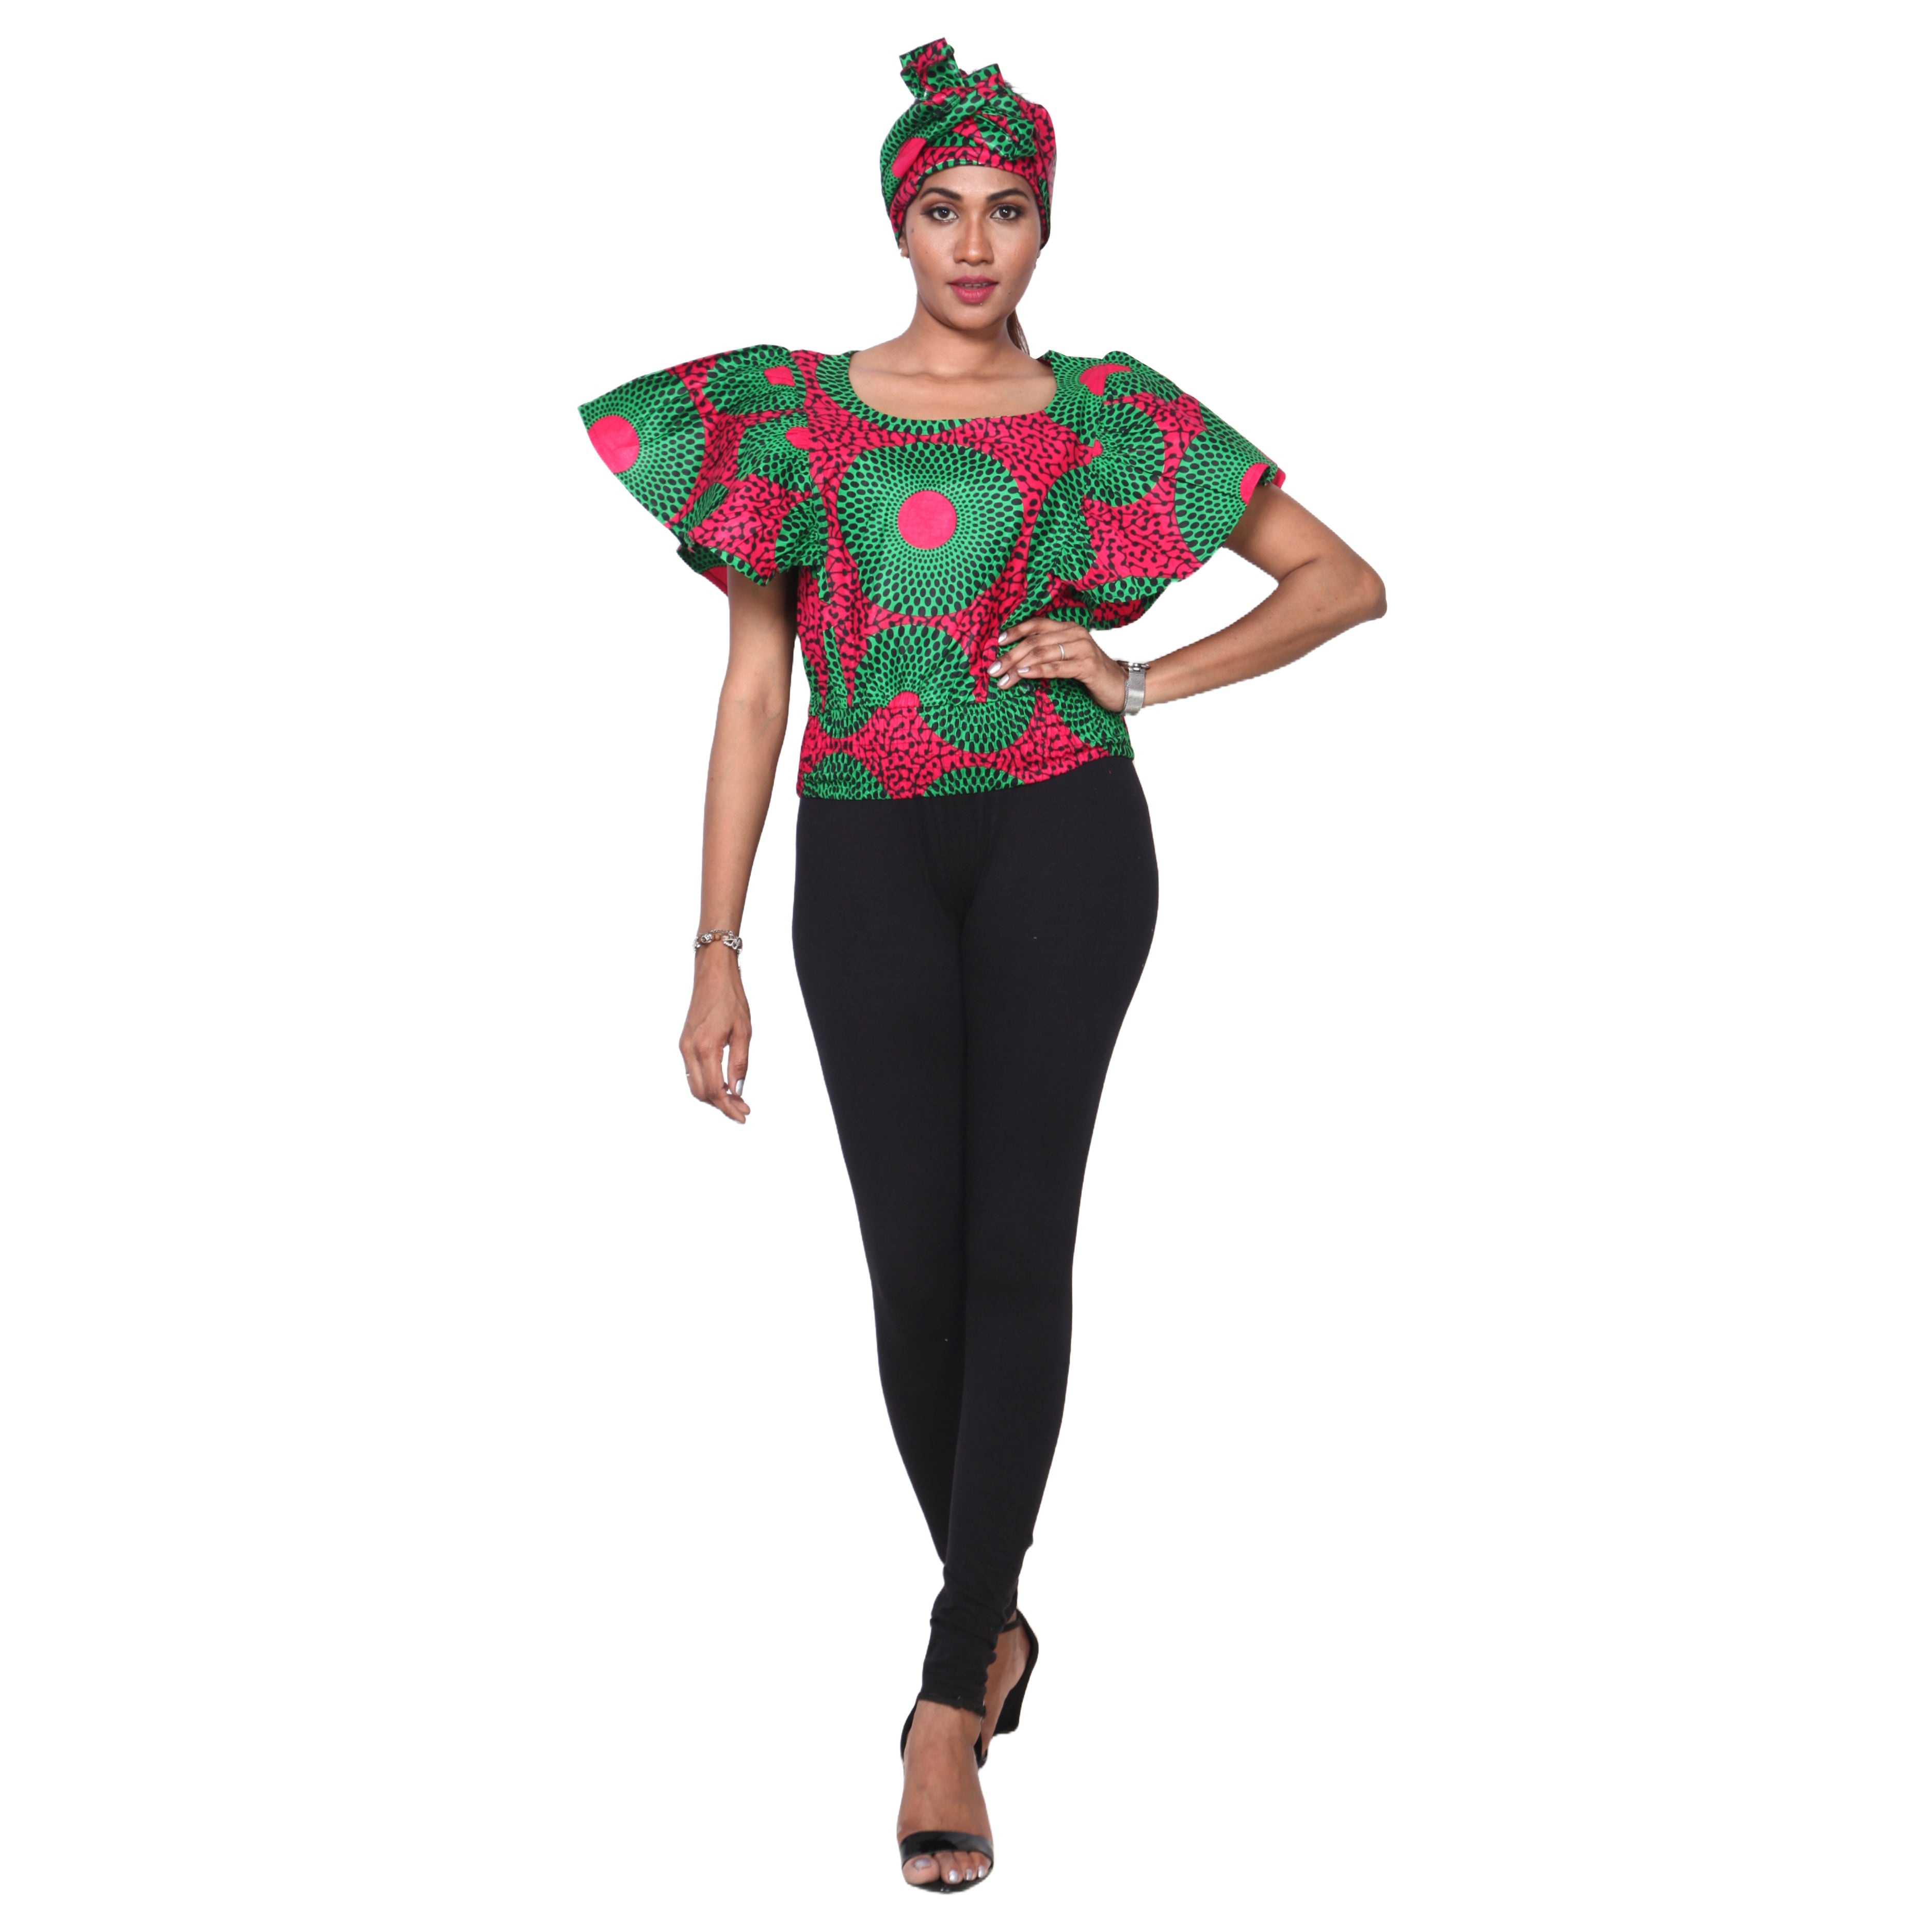 Women's African Print Short Sleeve Top red and green